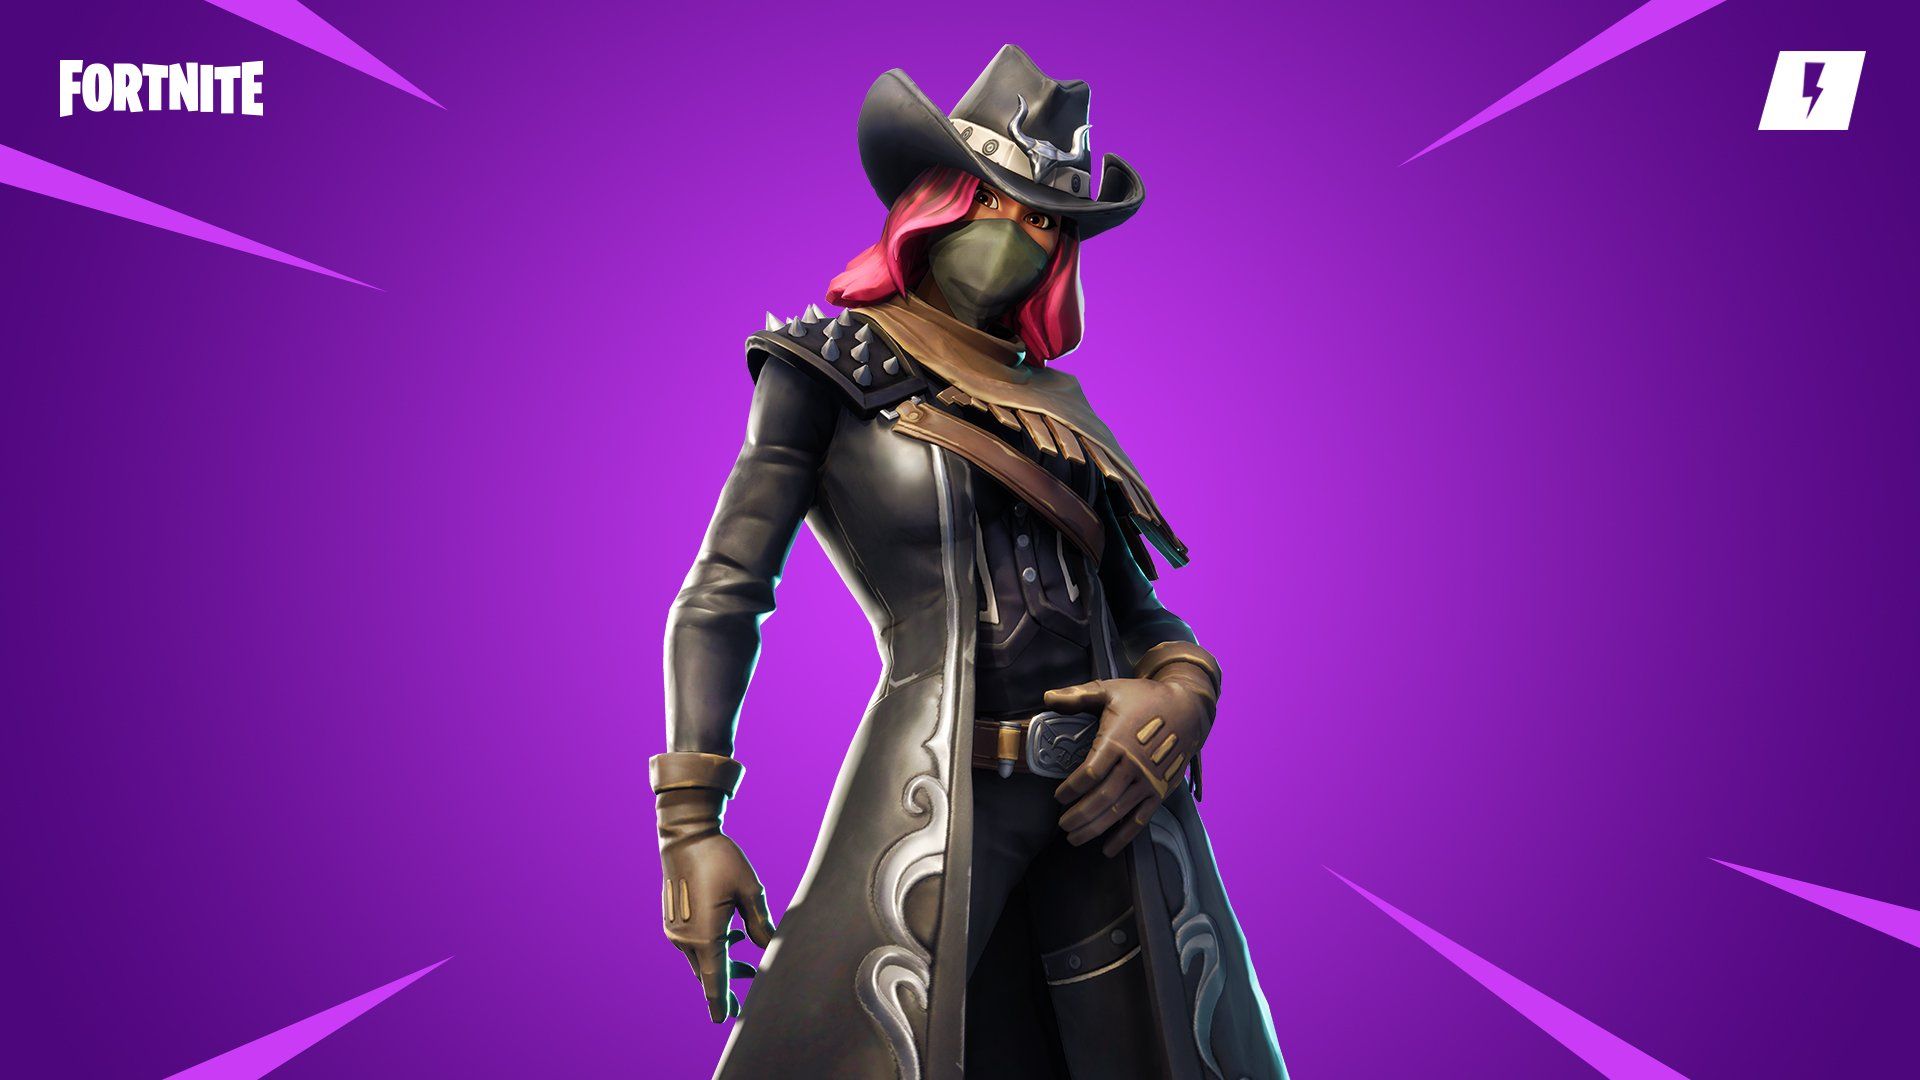 Fortnite on Twitter: Missed out on Calamity in Unlock this Soldier from the...